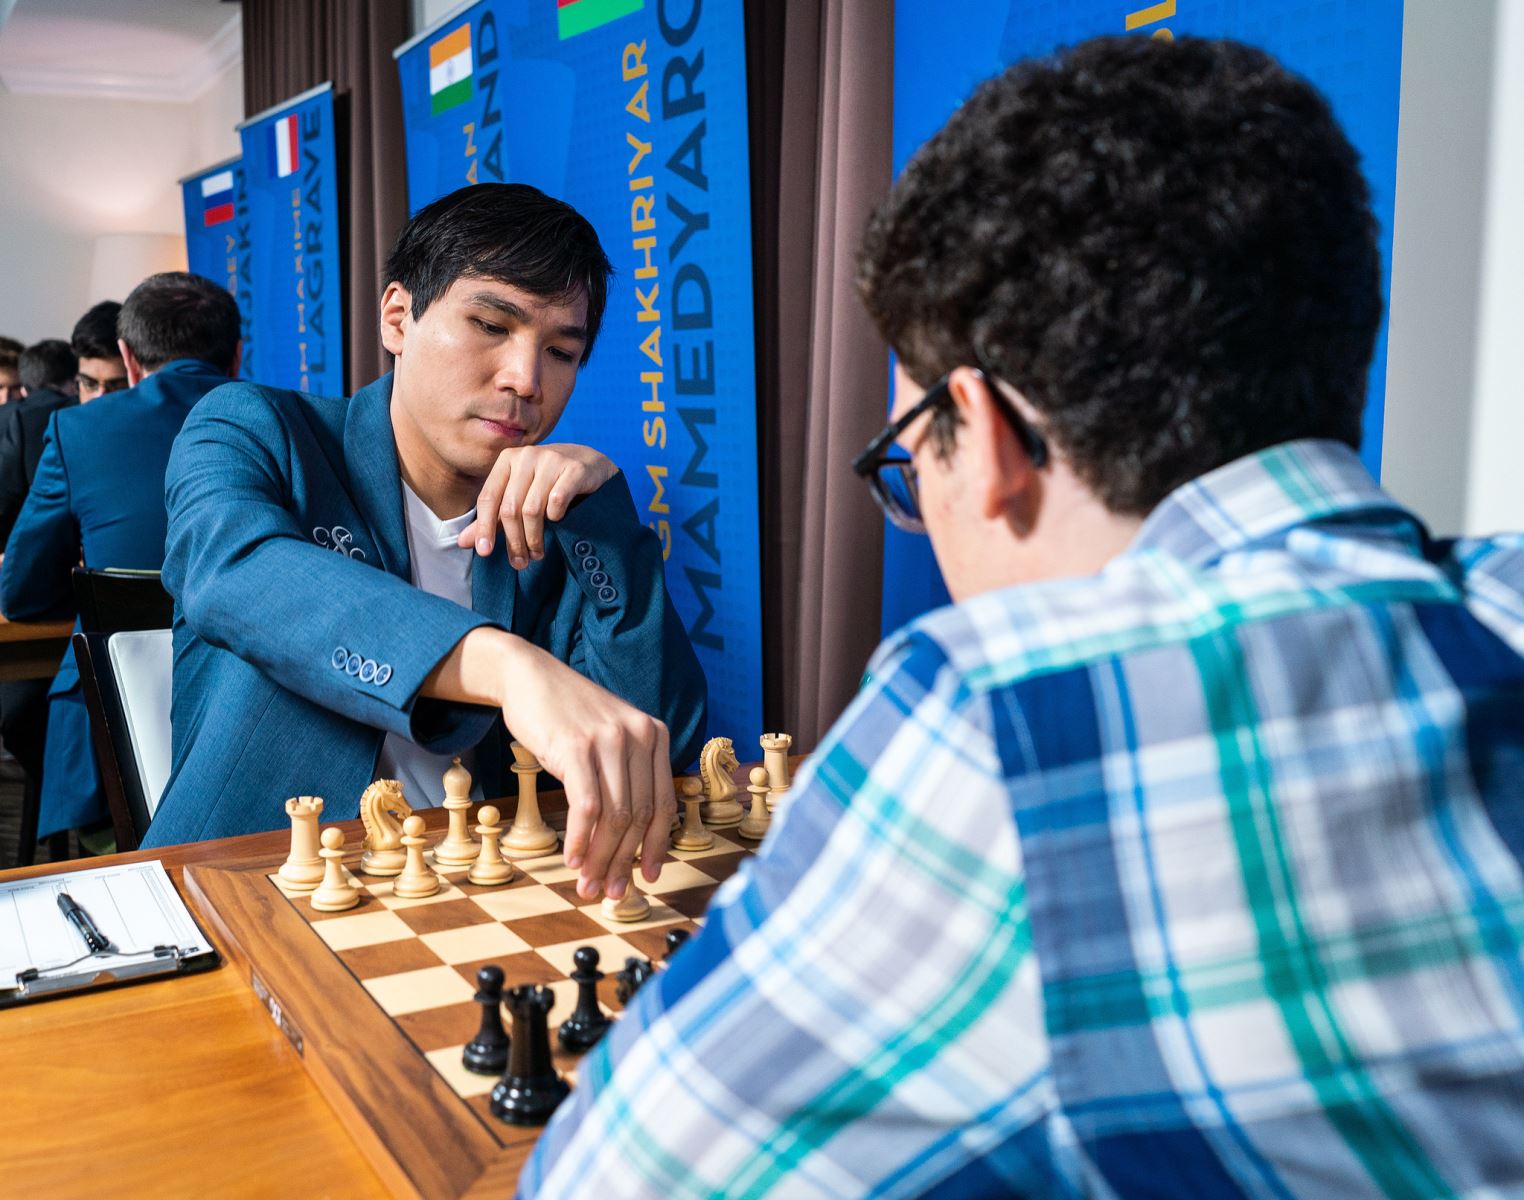 Wesley So beginning his final round game against Fabiano Caruana at the 2018 Sinquefield Cup